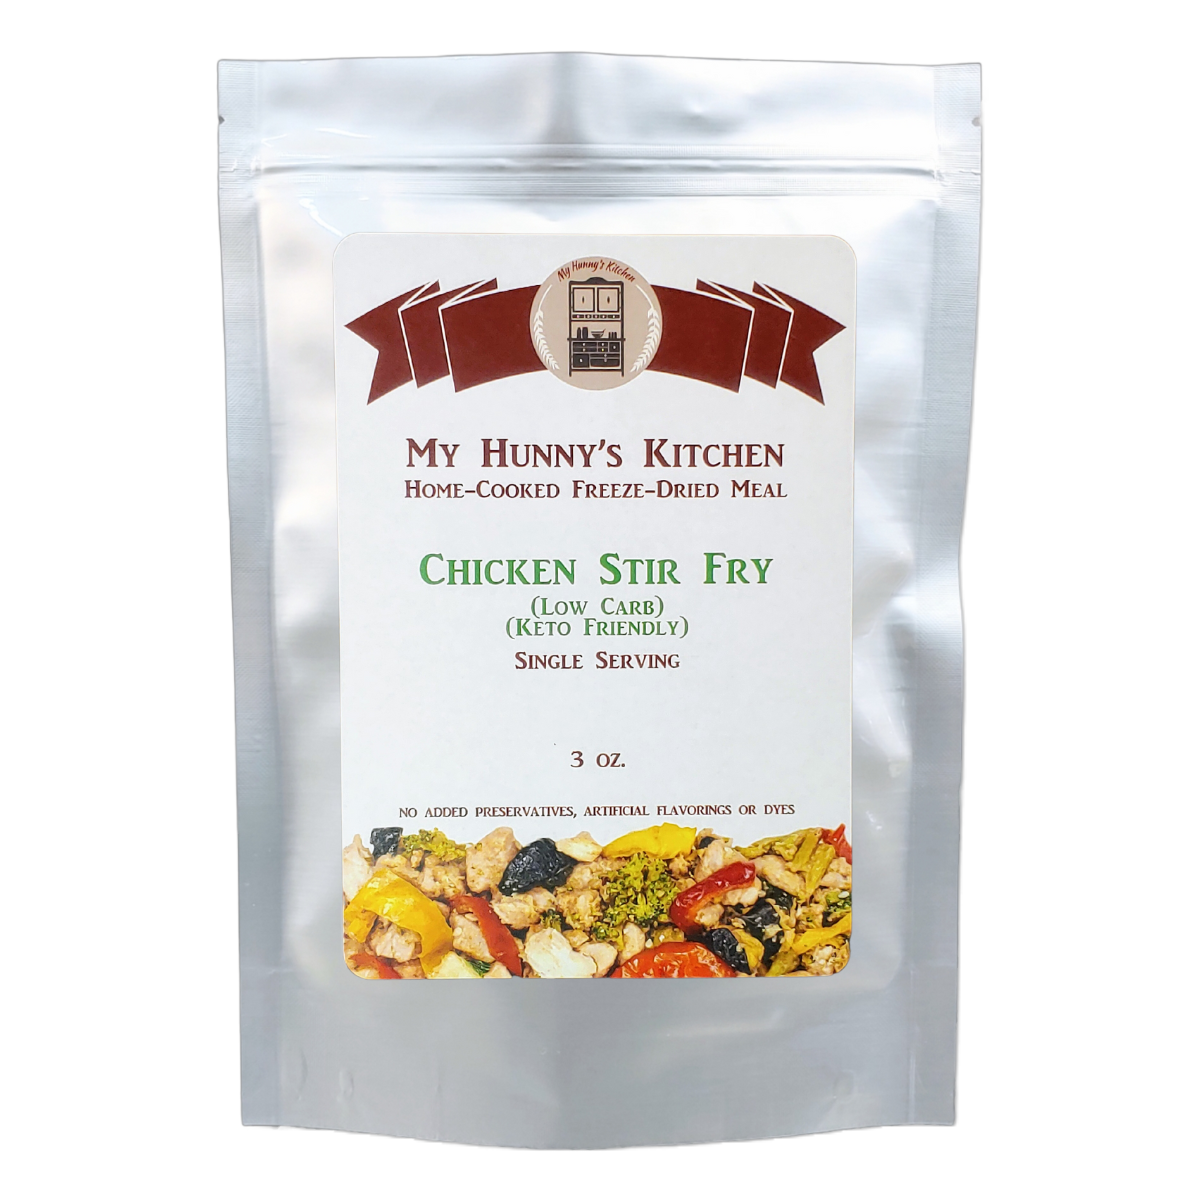 Chicken Stir Fry Freeze Dried Meal packaging front view